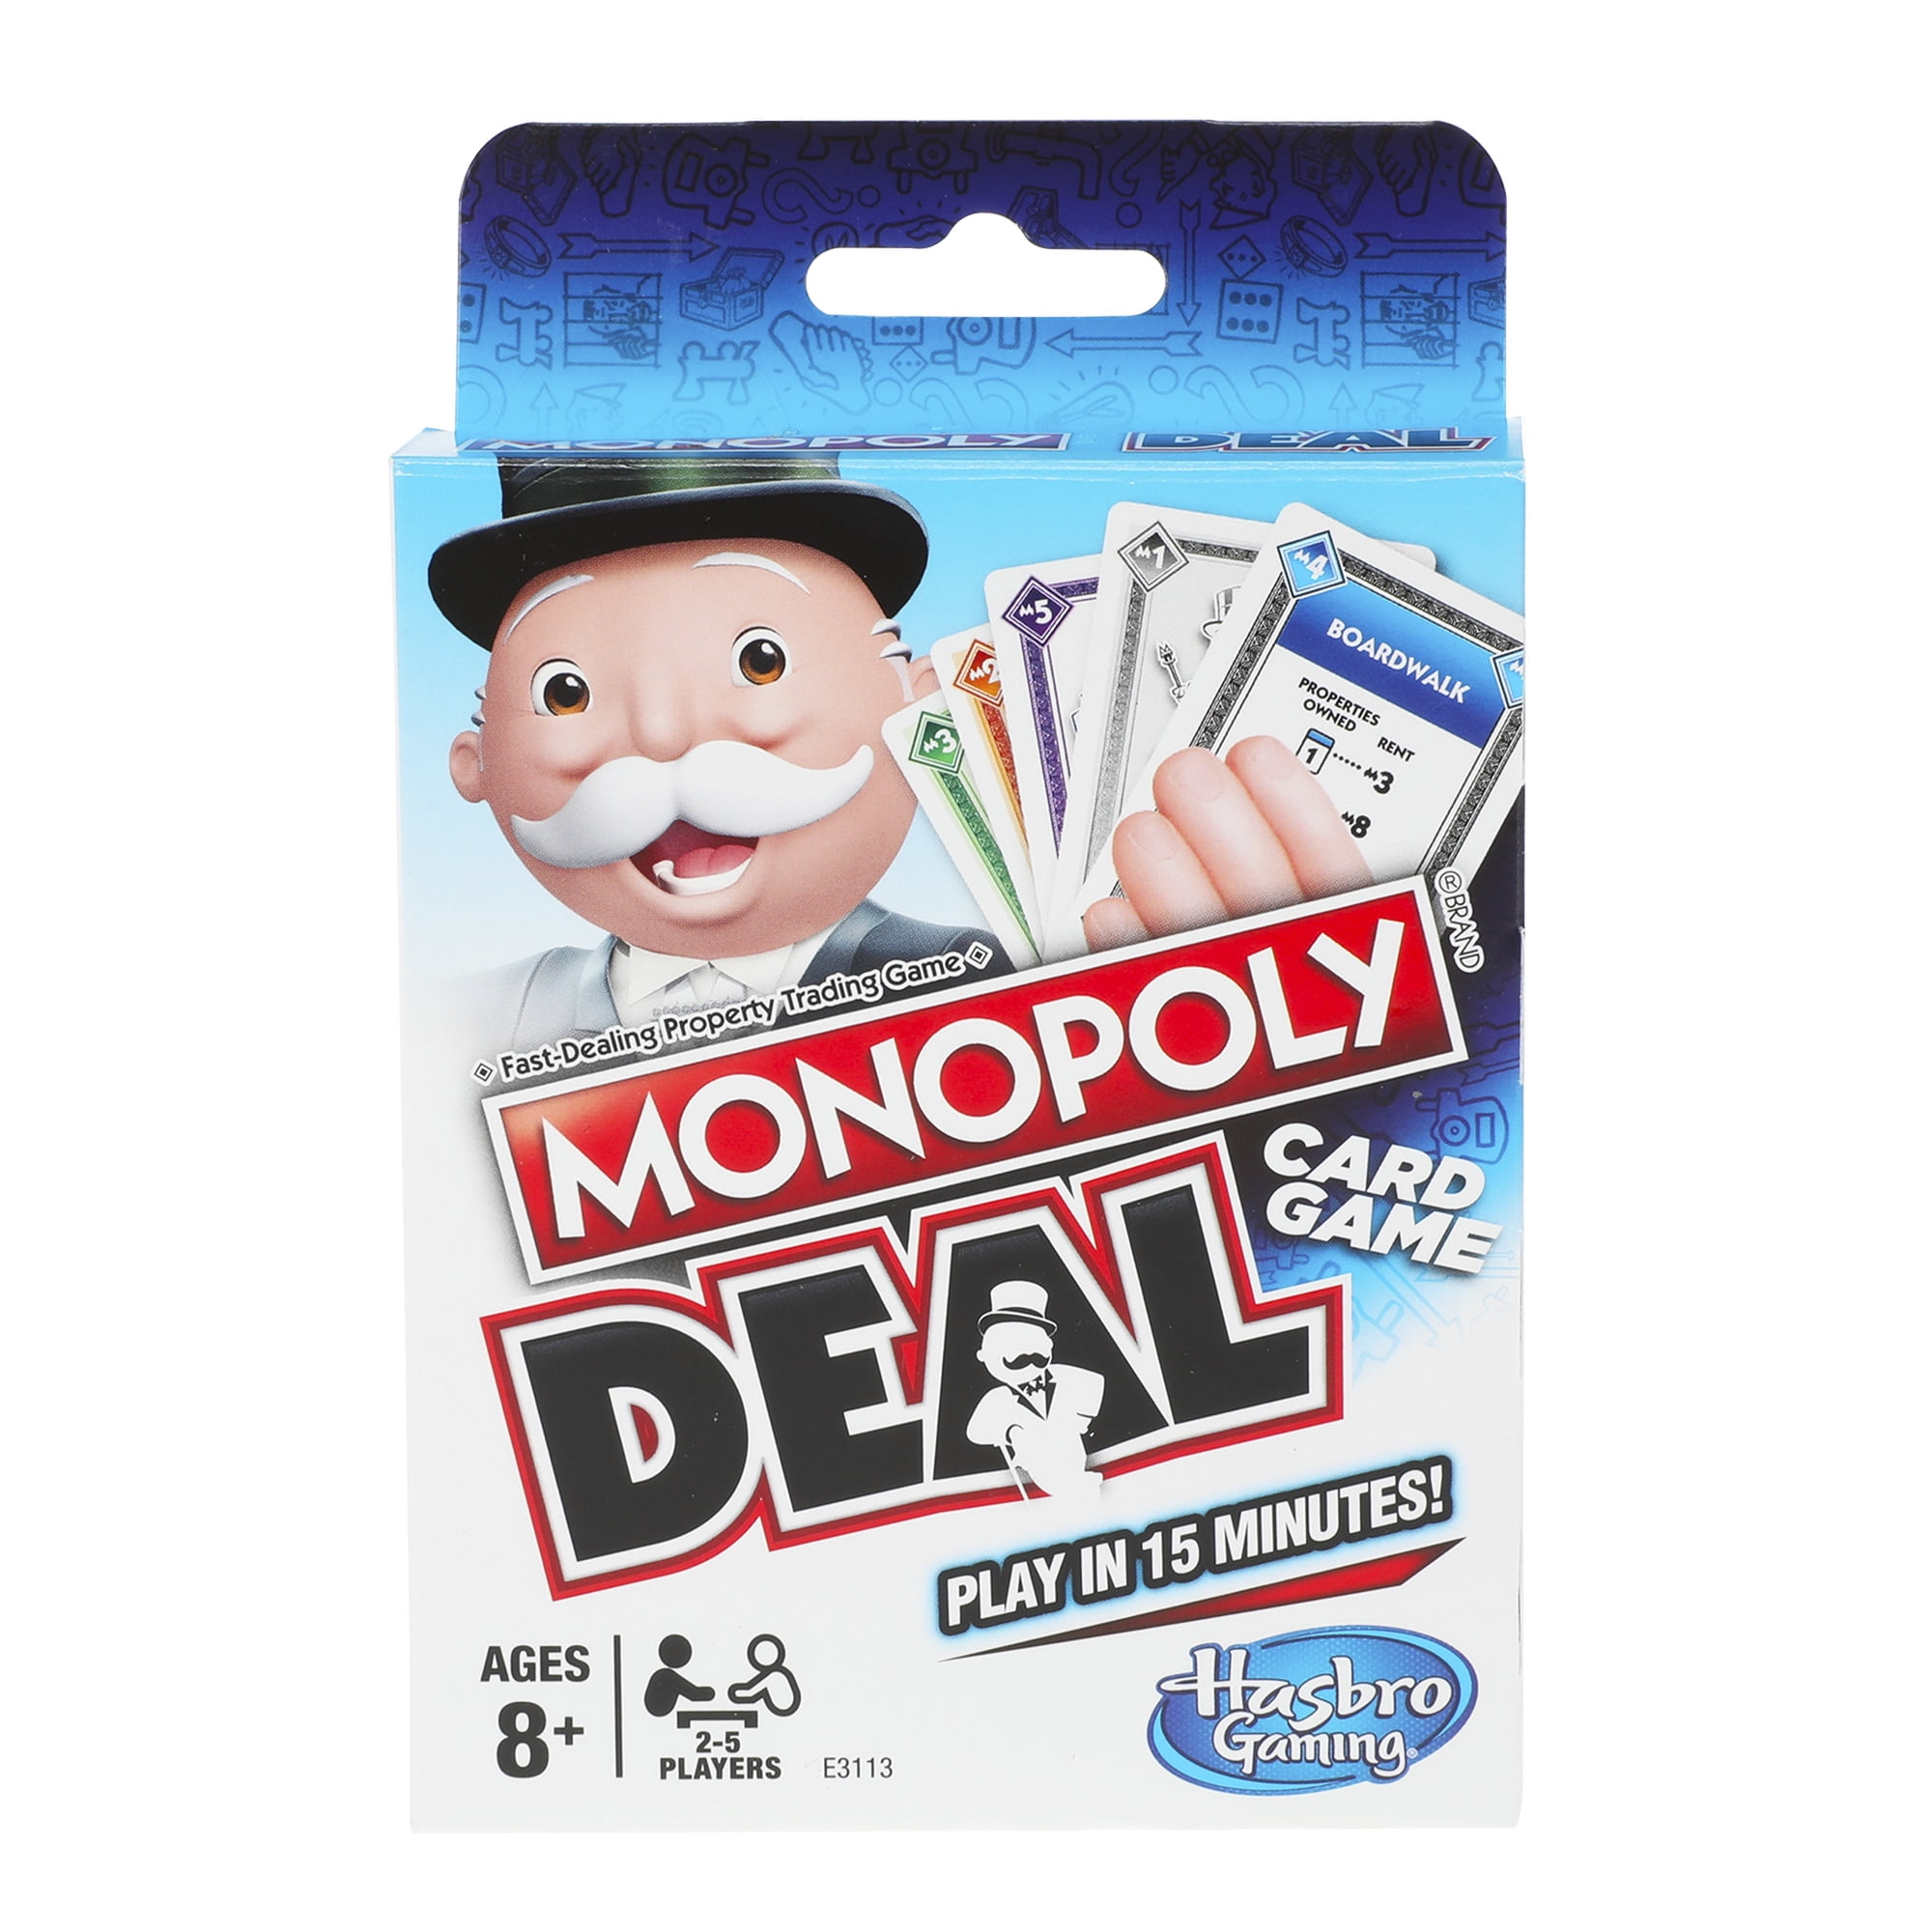 Deal Card Game For Kids/ Family Funskool Monopoly Free Shipping Worldwide 